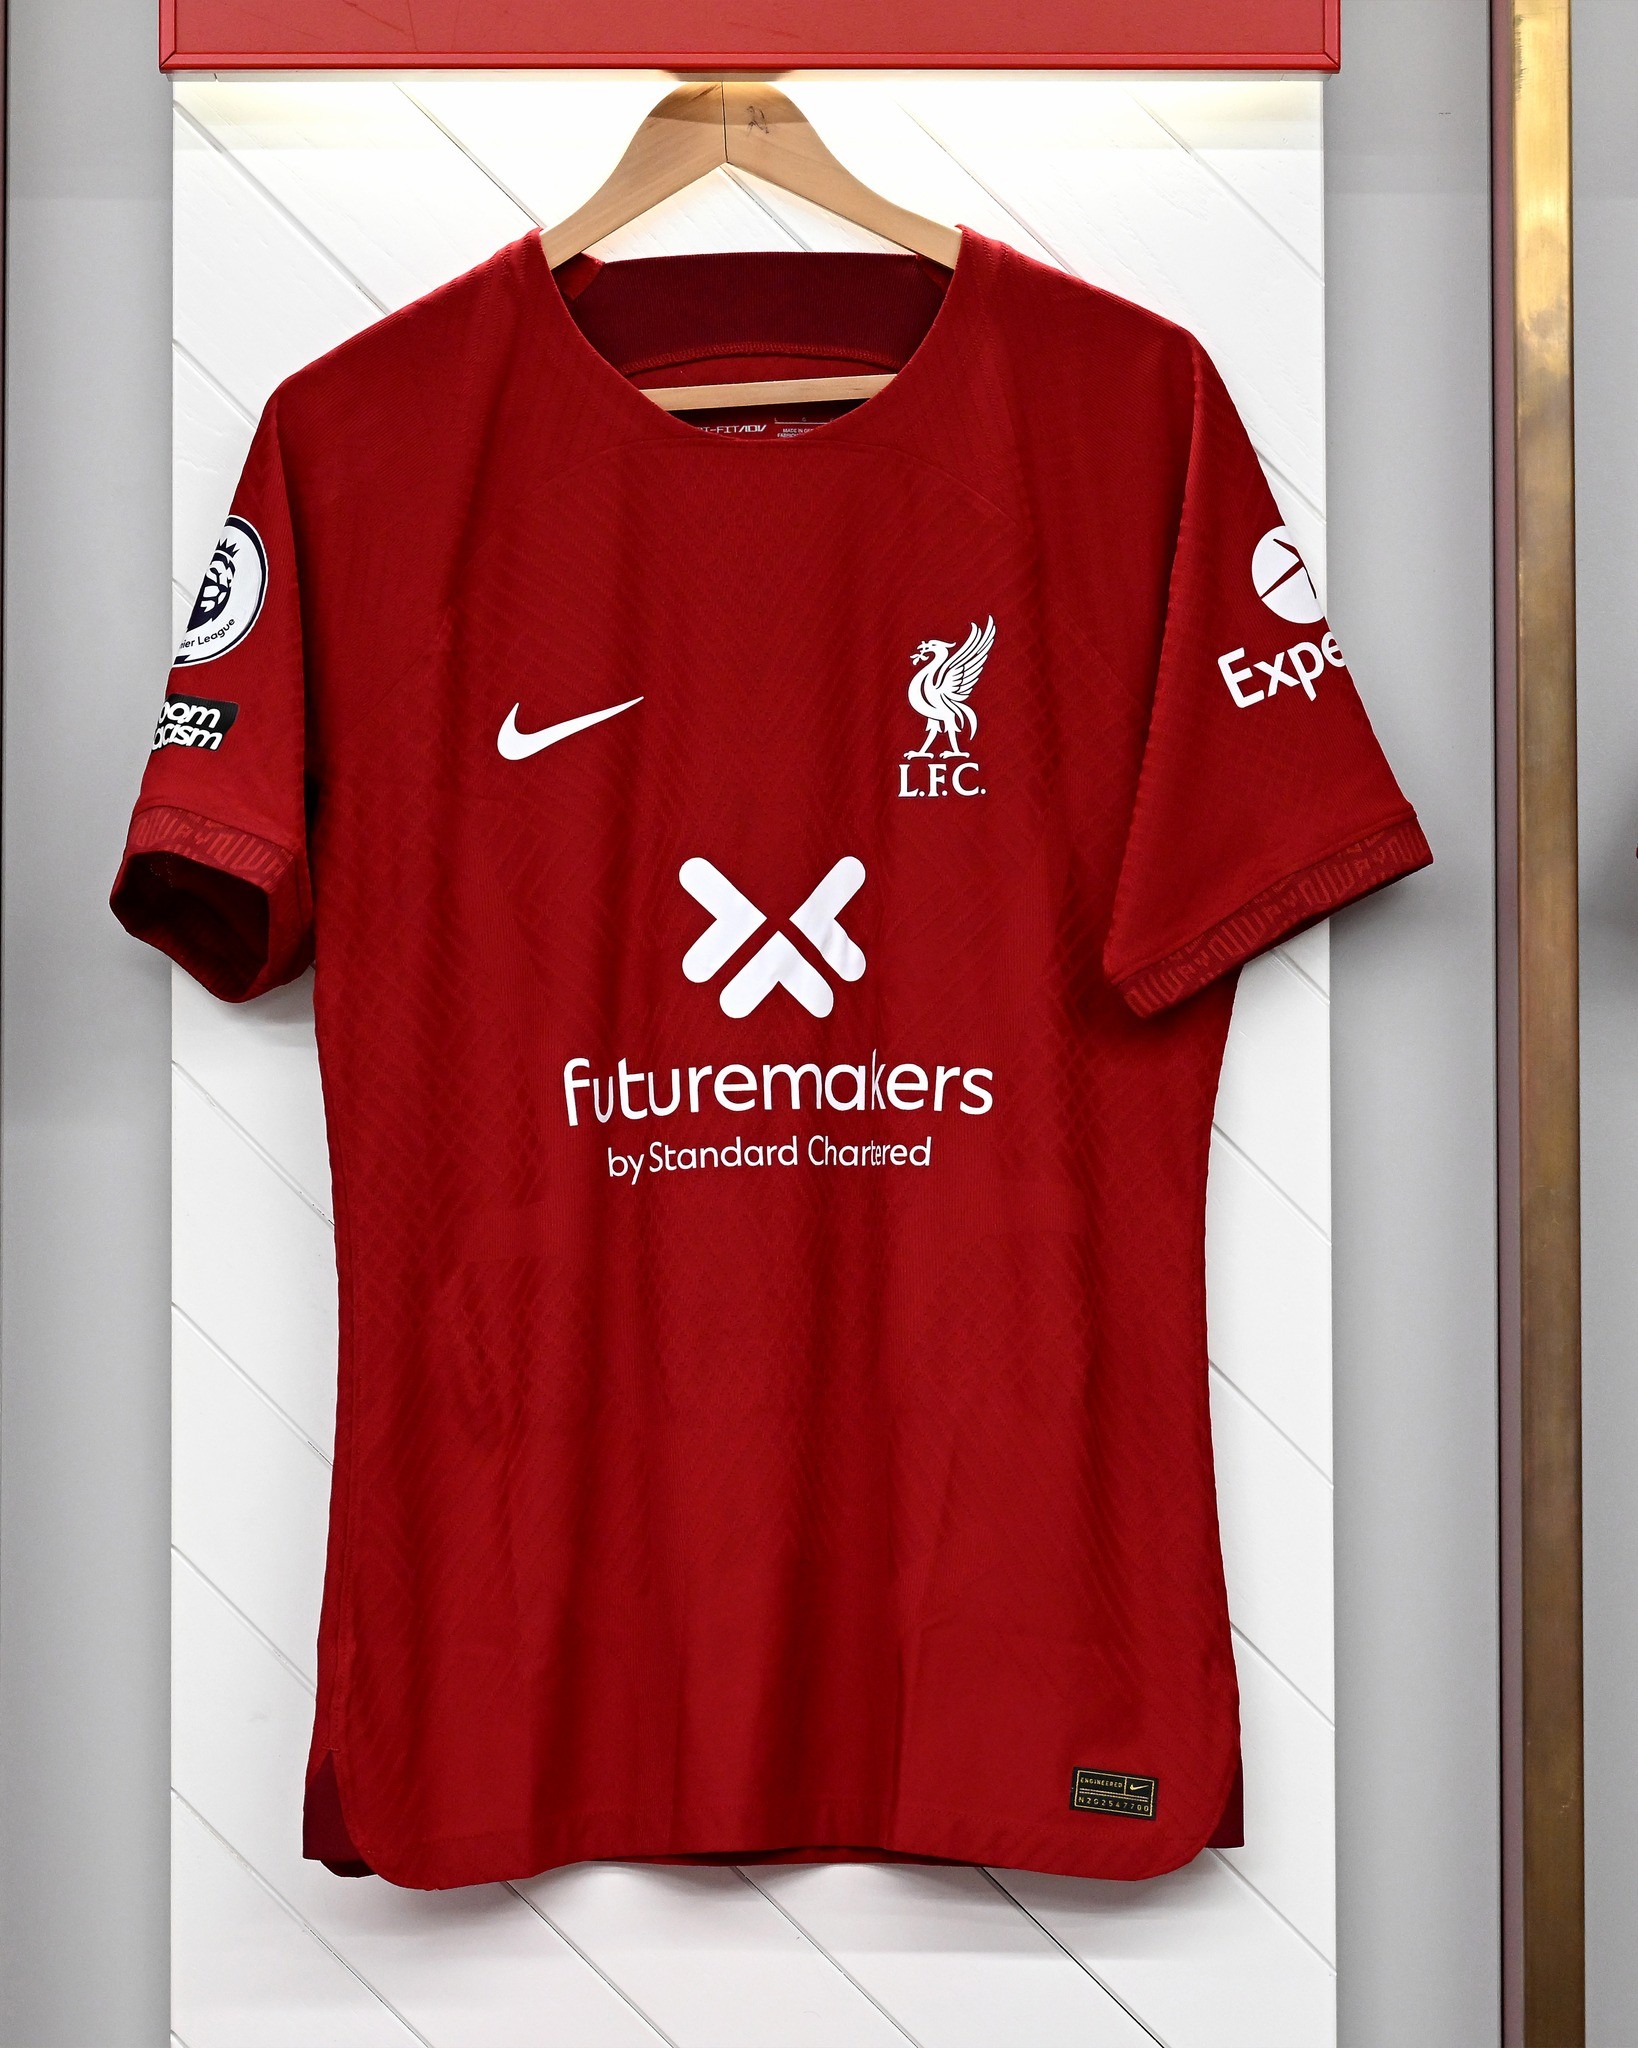 A Pair Of Limited Edition Futuremakers Shirts One Signed By Liverpool FCs Andy Robertson One